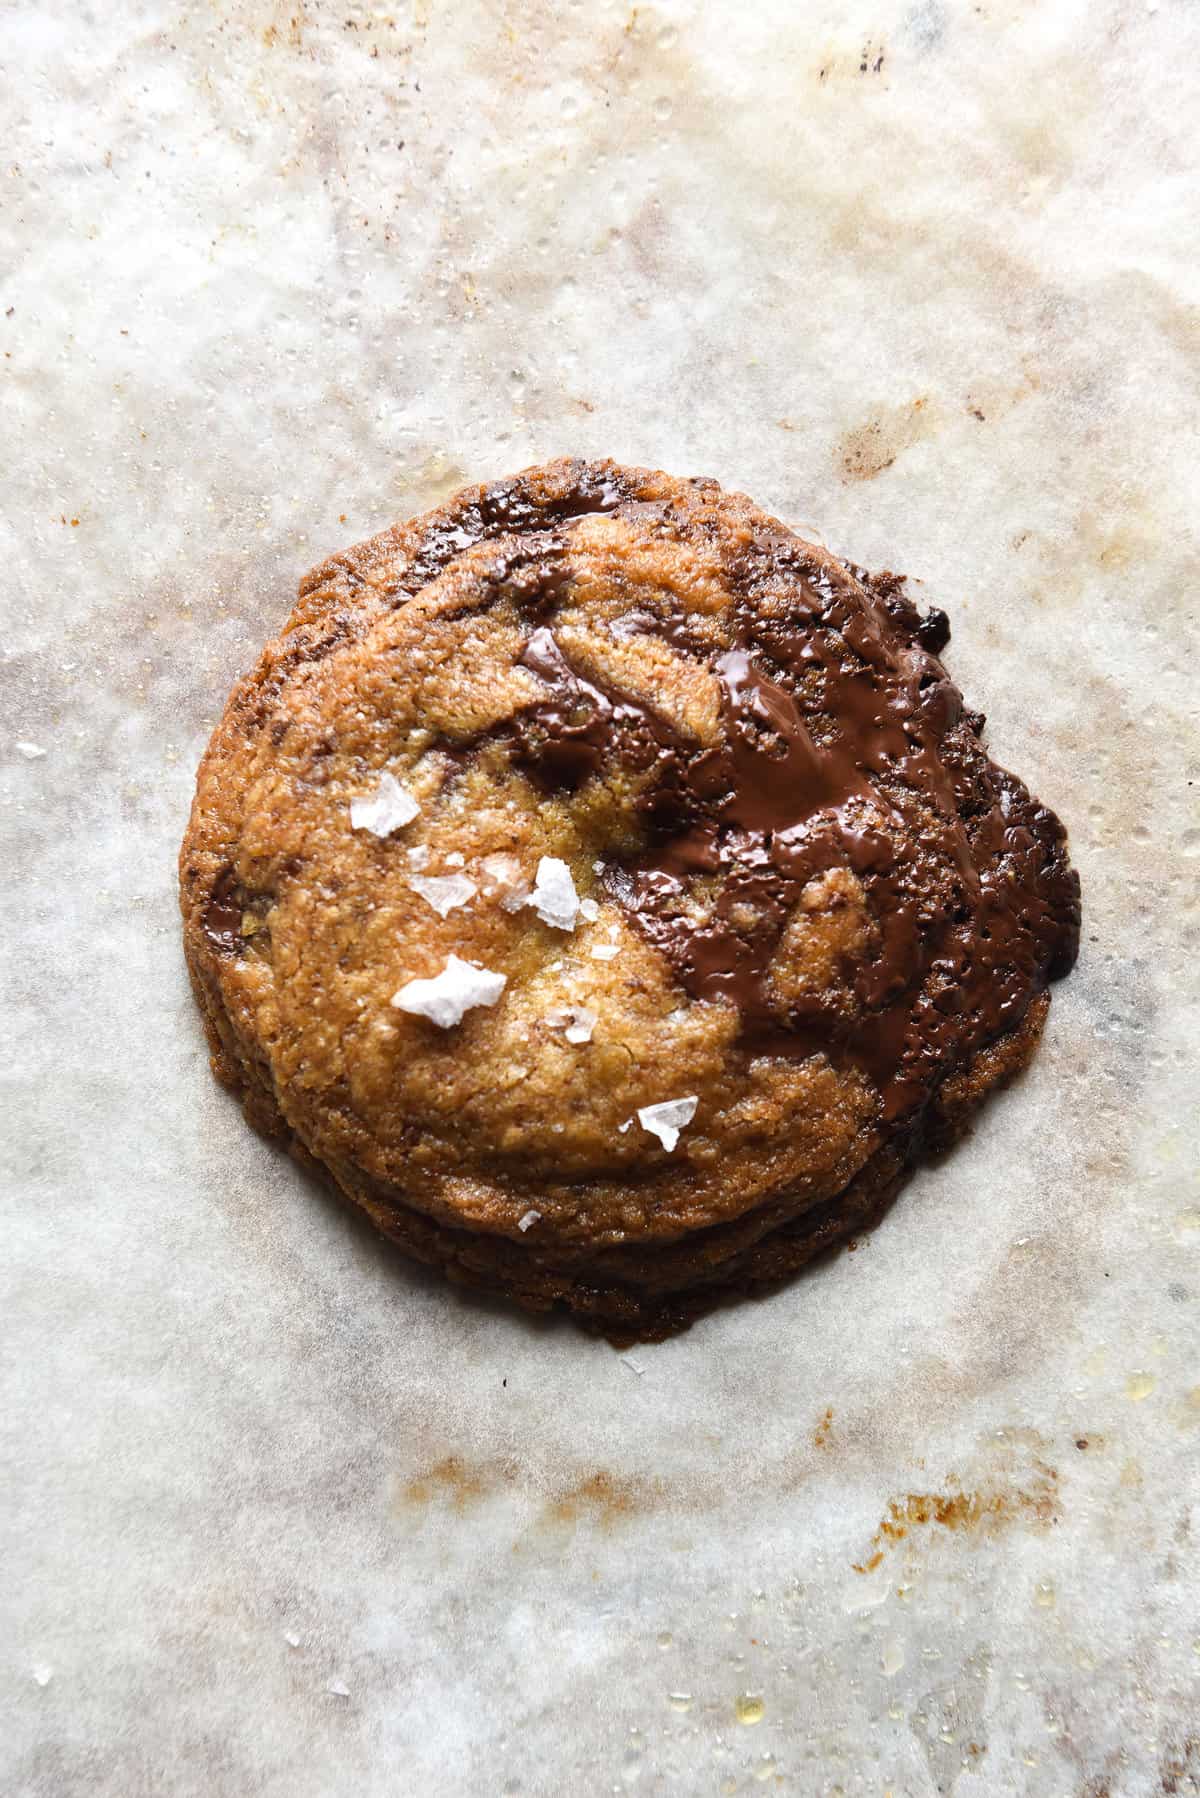 Gluten free choc-chip cookies (without xanthum gum) from www.georgeats.com